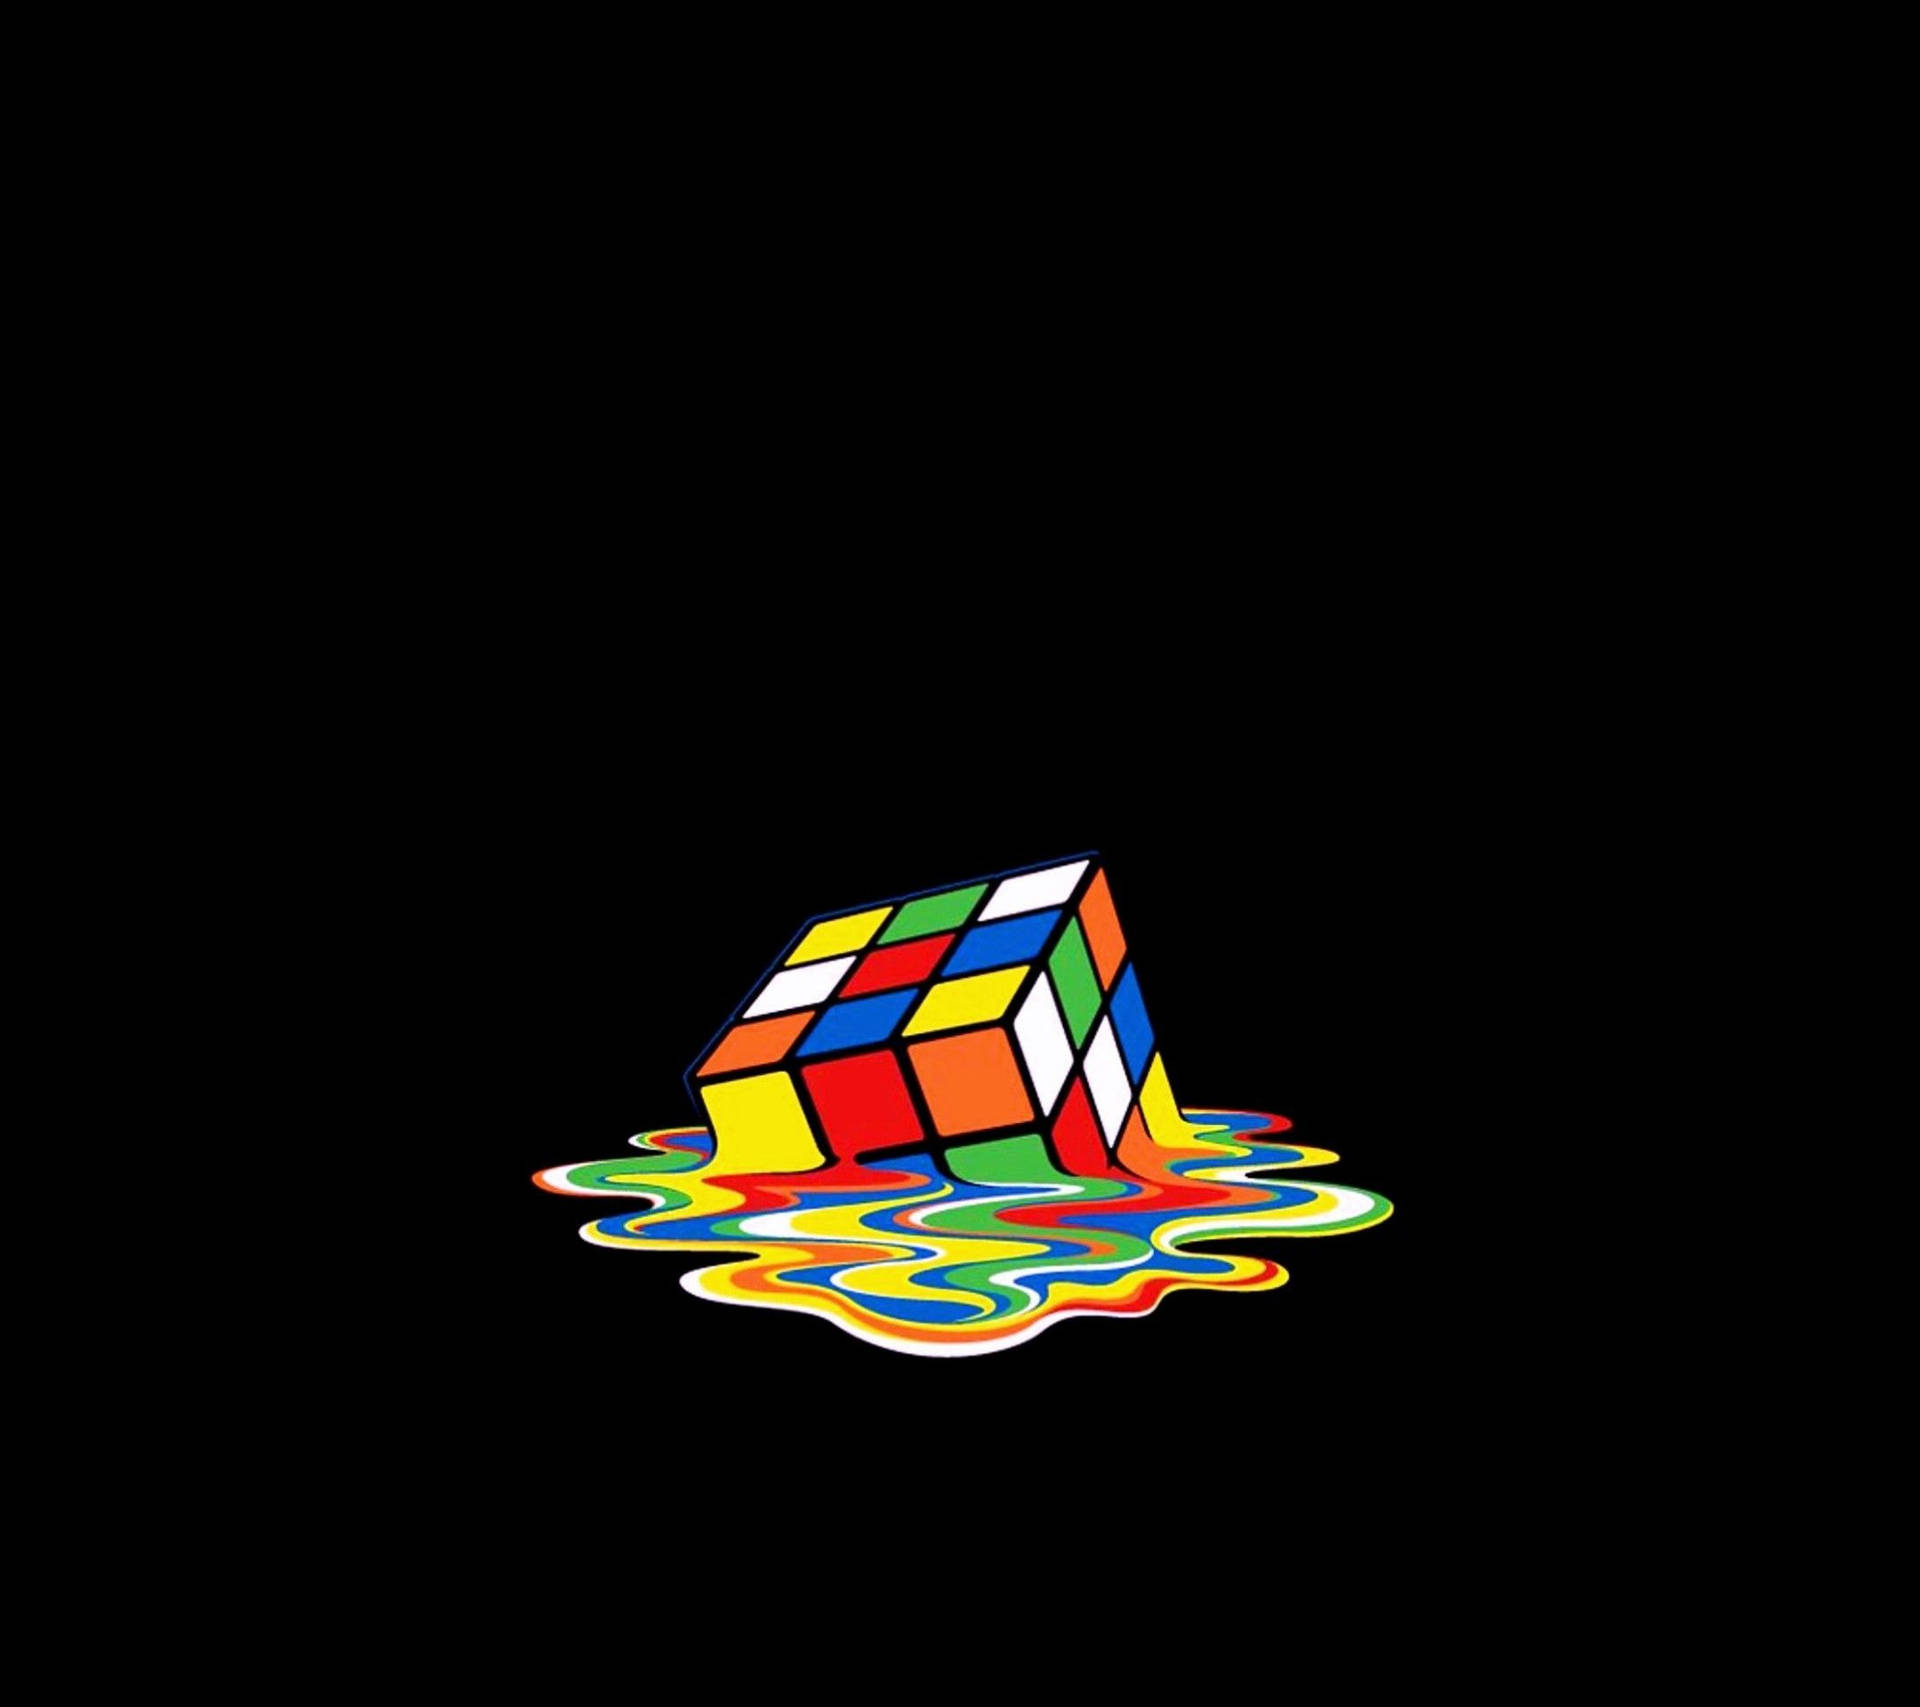 Melted Rubik's Cube in an Amoled Wallpaper Wallpaper